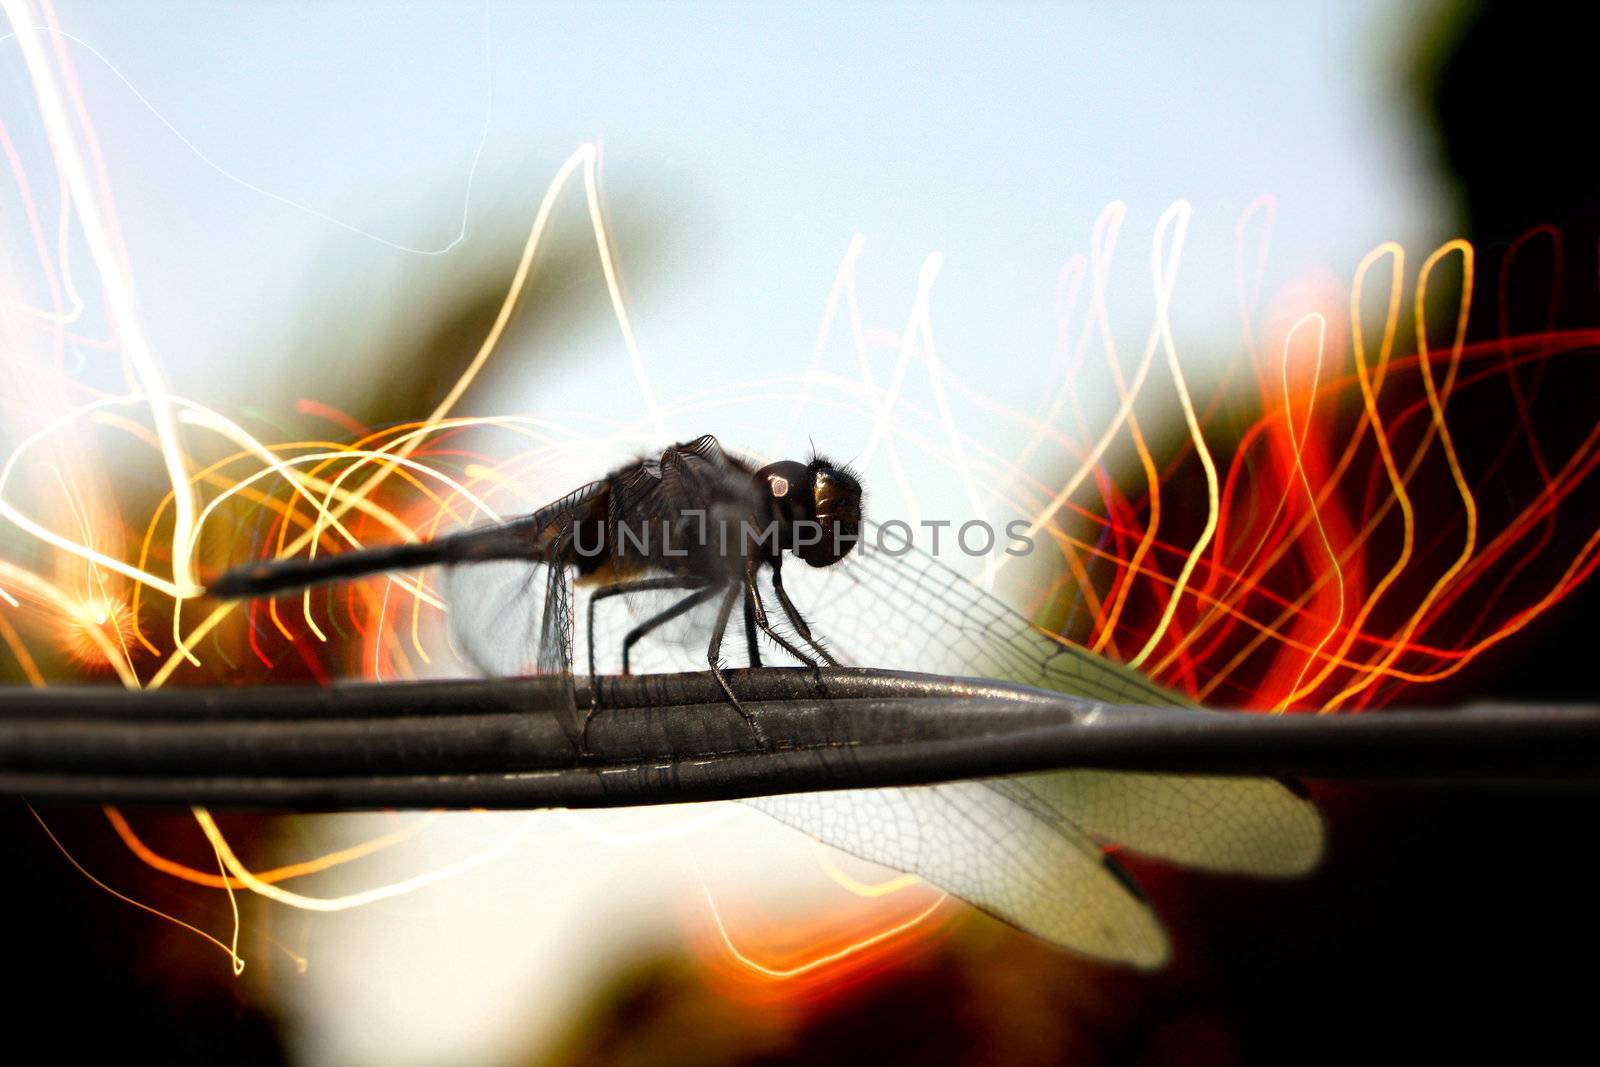 A dragonfly (Flying insect) sitting on a communications cable surrounded with wireless signals. The image depicts the dragonfly as a wireless communication transmitter or reciever.